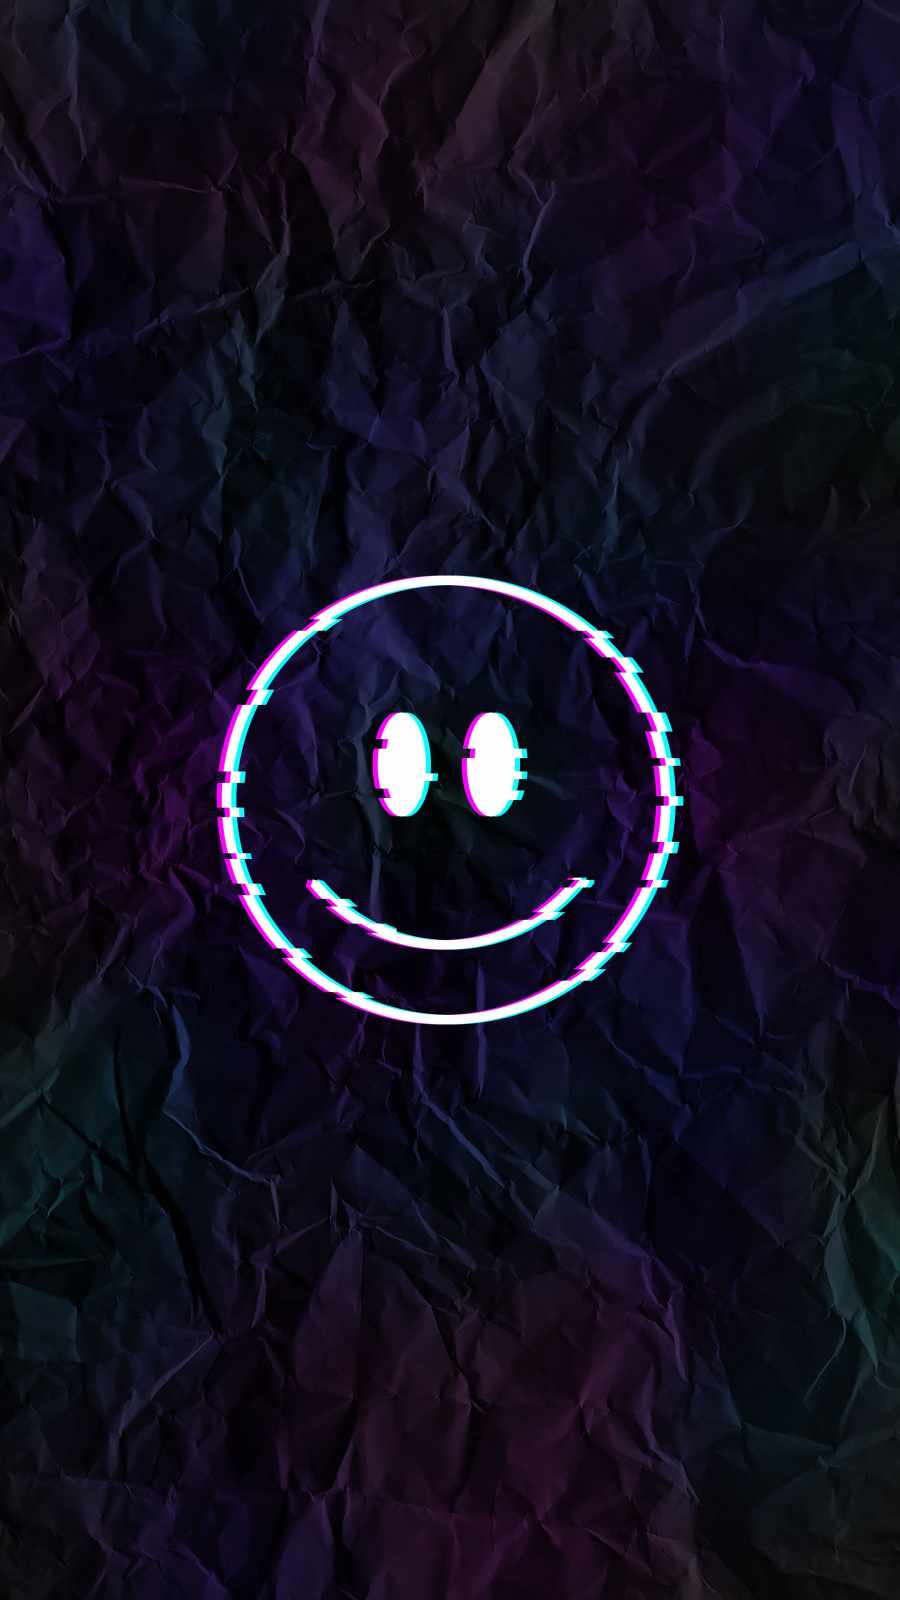 Neon smiley face on a black background - Smile